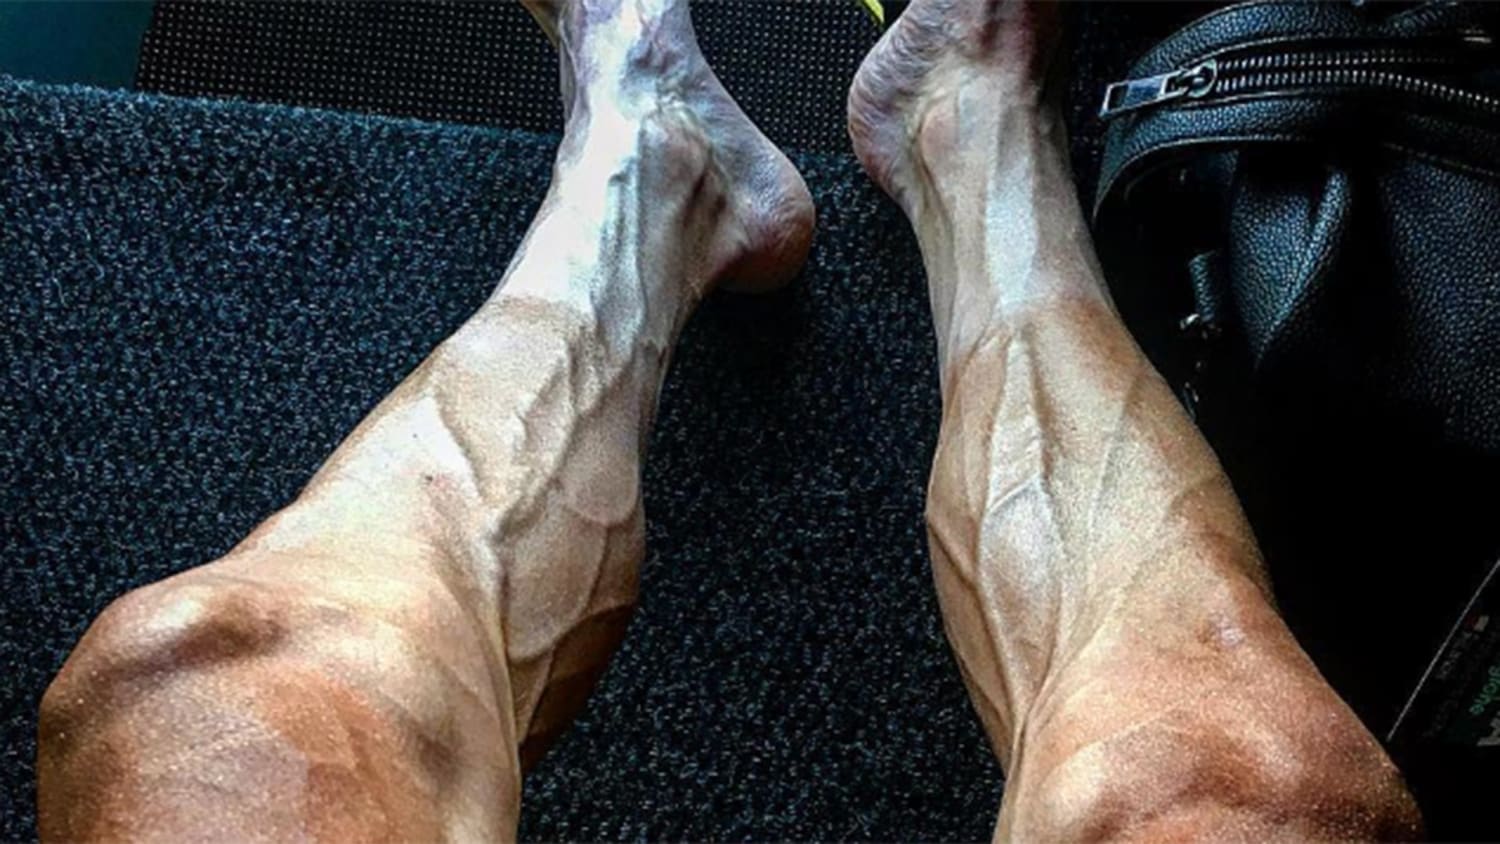 Cyclist shows what competing in the Tour de France can do to your legs